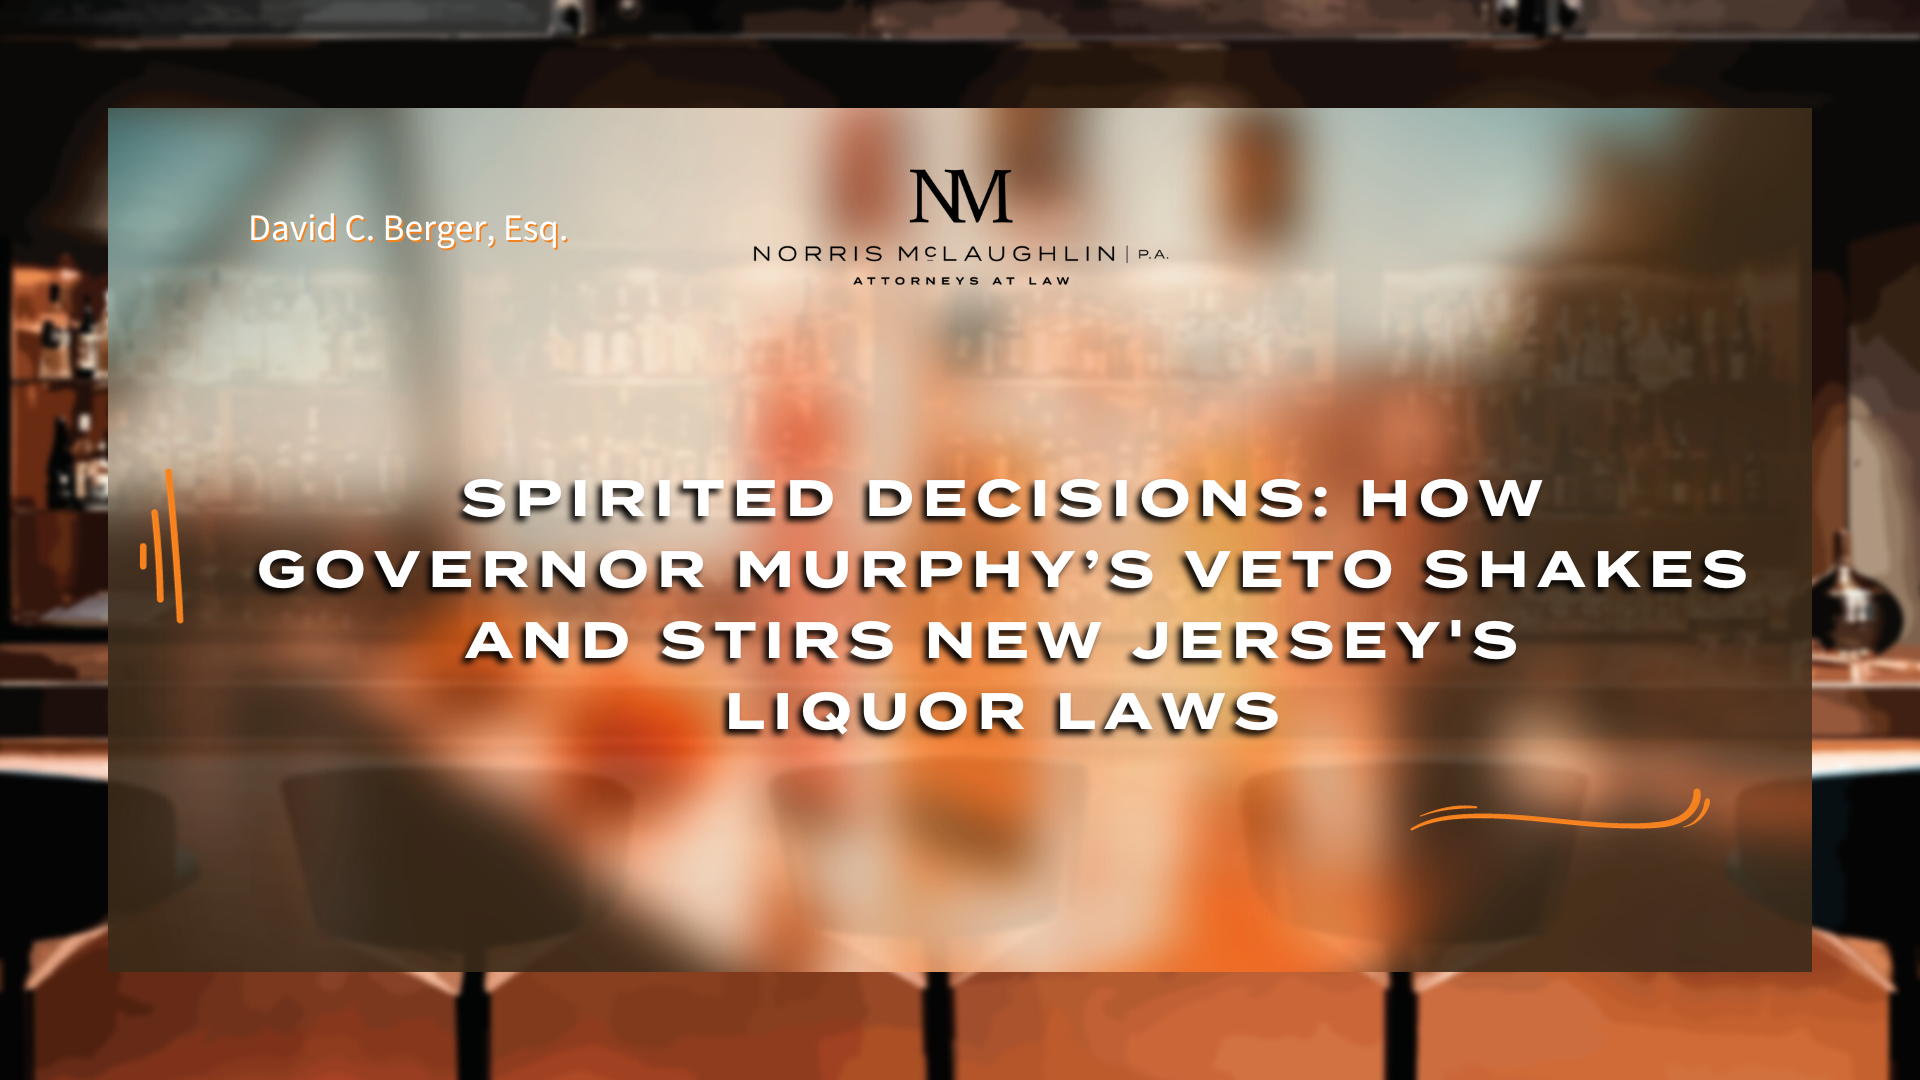 Spirited Decisions: How Governor Murphy’s Veto Shakes and Stirs New Jersey's Liquor Laws